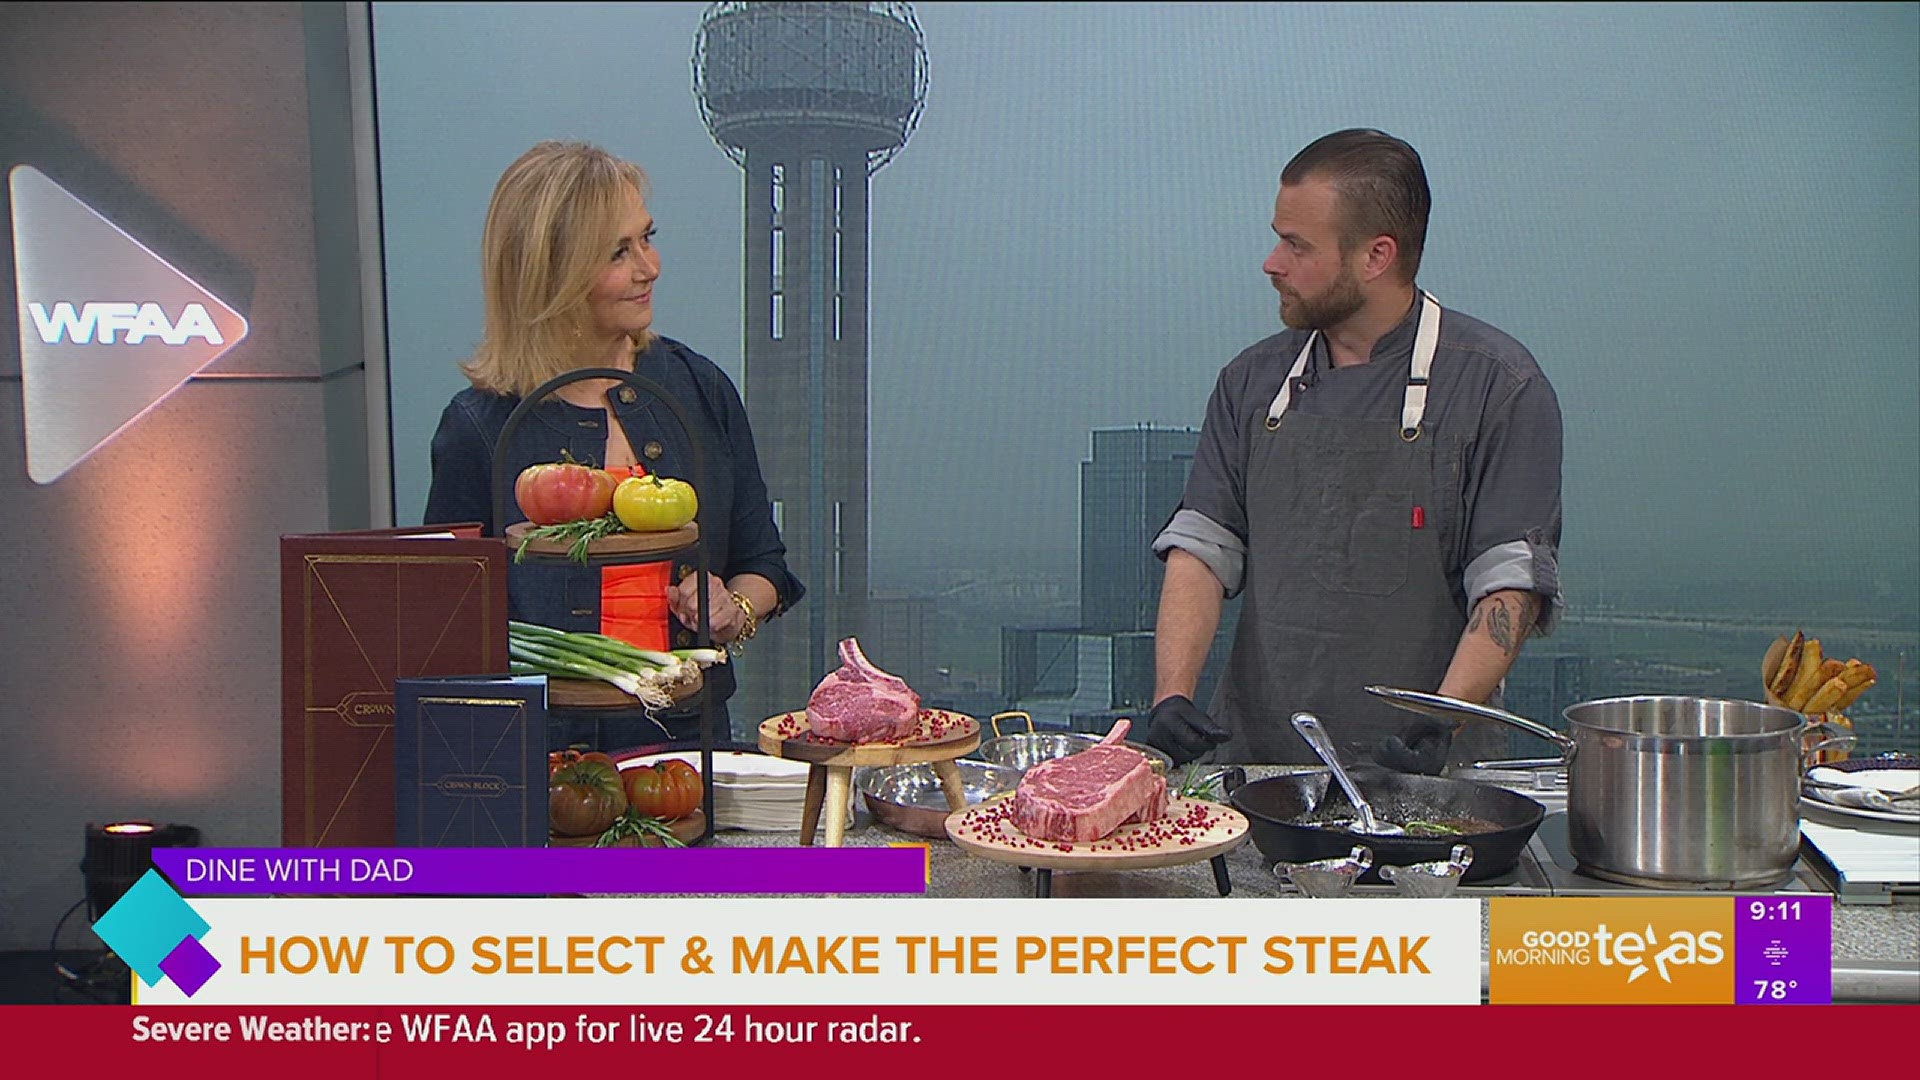 Crown Block Executive Chef Ty Thaxton offers tips on selecting and cooking the perfect steak for Dad on his day